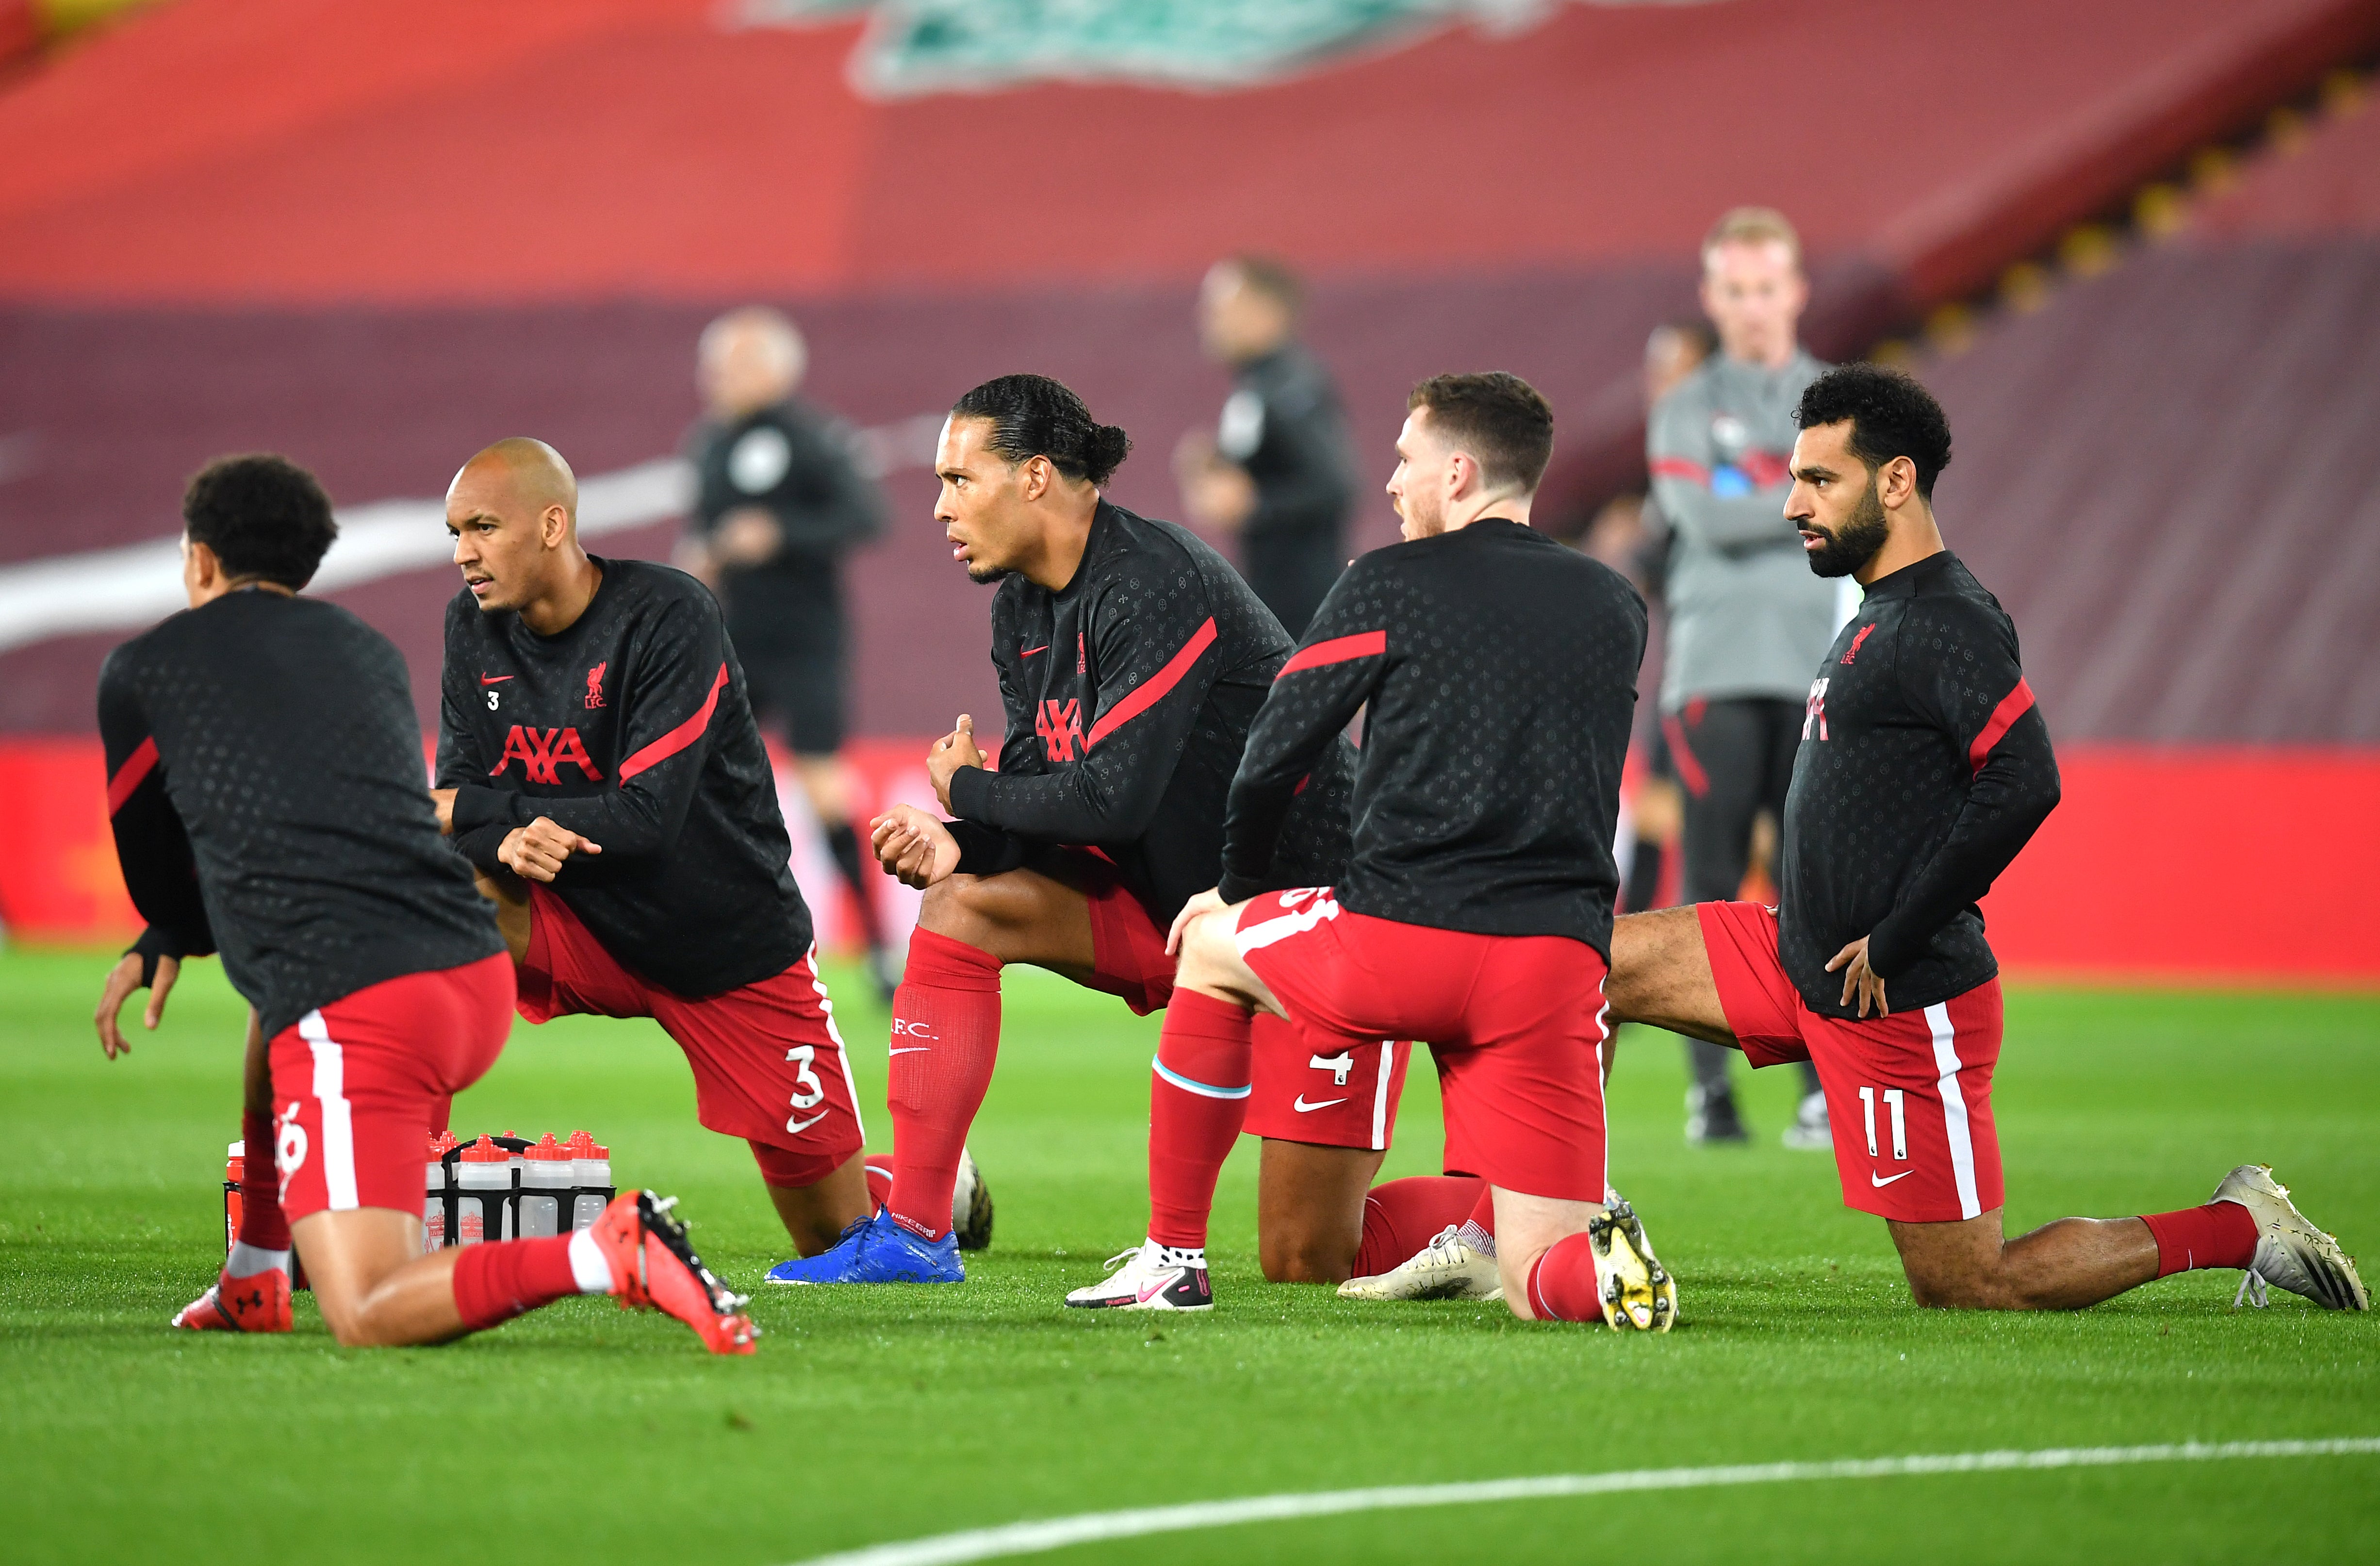 Liverpool’s Trent Alexander-Arnold (left), Fabinho, Virgil van Dijk, Andrew Robertson and Mohamed Salah (right) warming up before the Premier League match at Anfield, Liverpool.